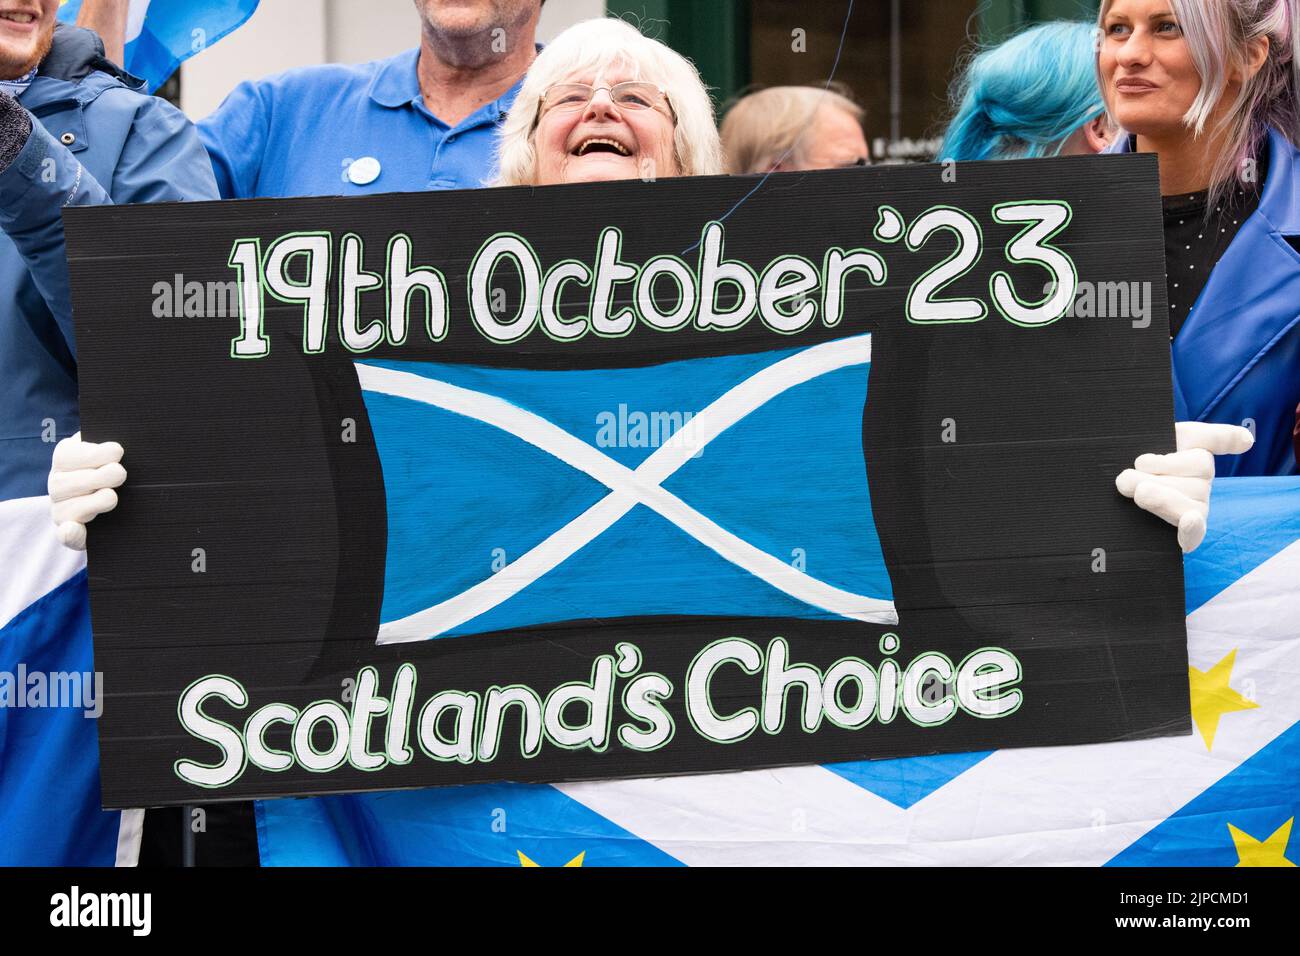 Scottish Independence Referendum 19th October 2023 placard held at Conservative Leadership Election Hustings in Perth, Scotland, UK 16 August 2022 Stock Photo